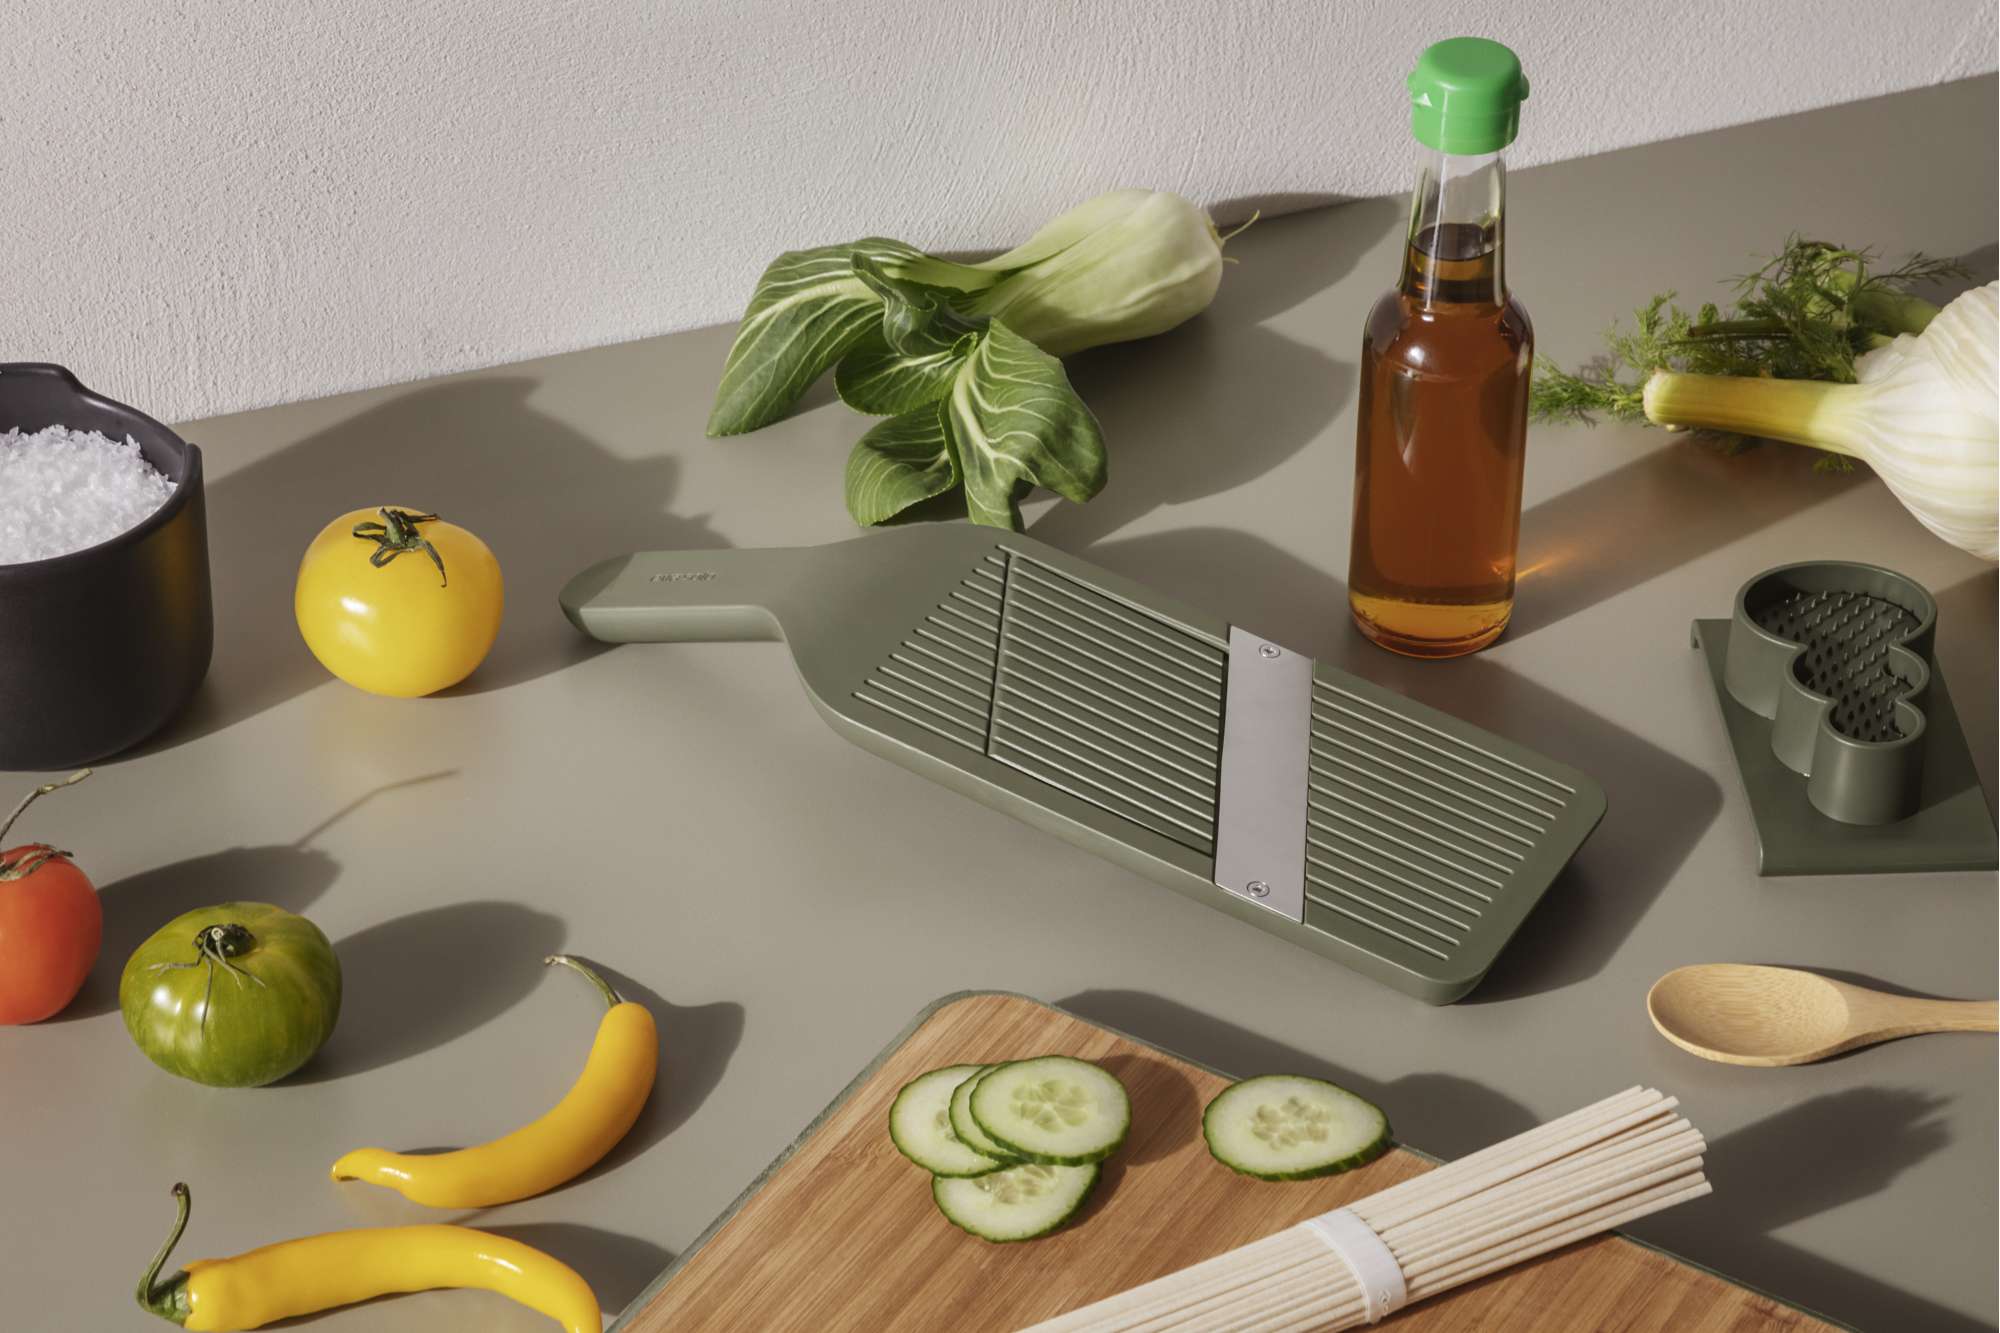 https://www.evasolo.com/%2FFiles%2FImages%2FPlytix%2FLifestyle_Photo_1%2F531536_Eva_Solo_Green_tools_Mandolin_slicer_table_with_vegetables_l.jpg